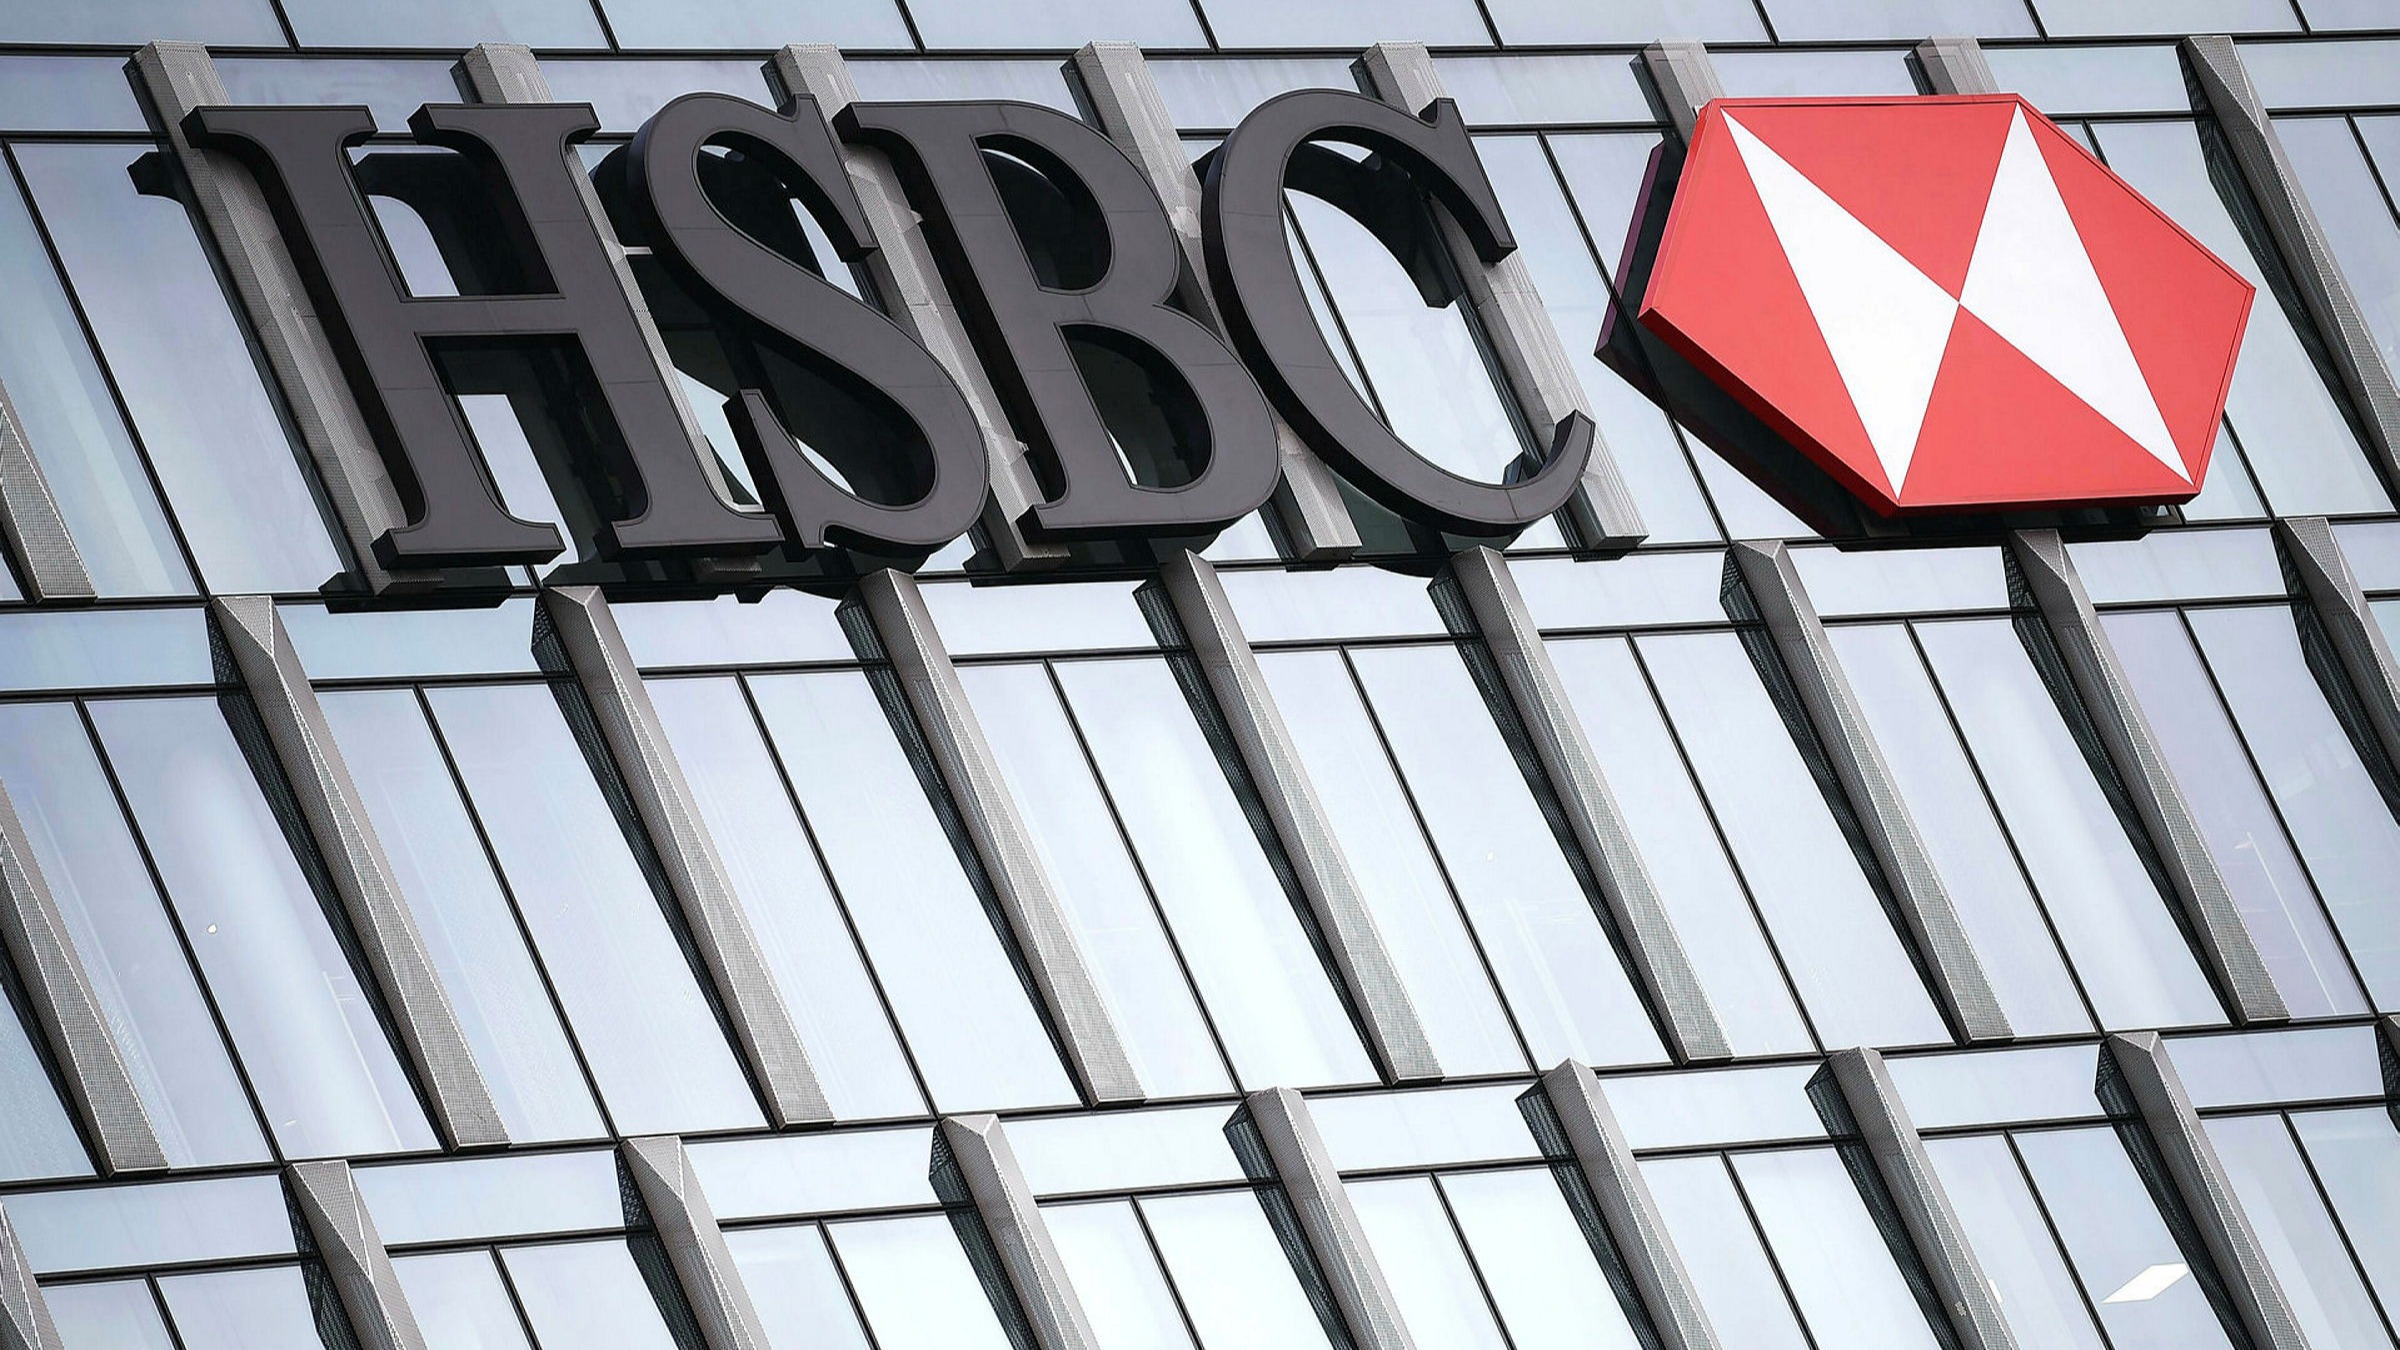 Opening Quote Hsbc Profits Halve While Bad Loan Provisions Rise